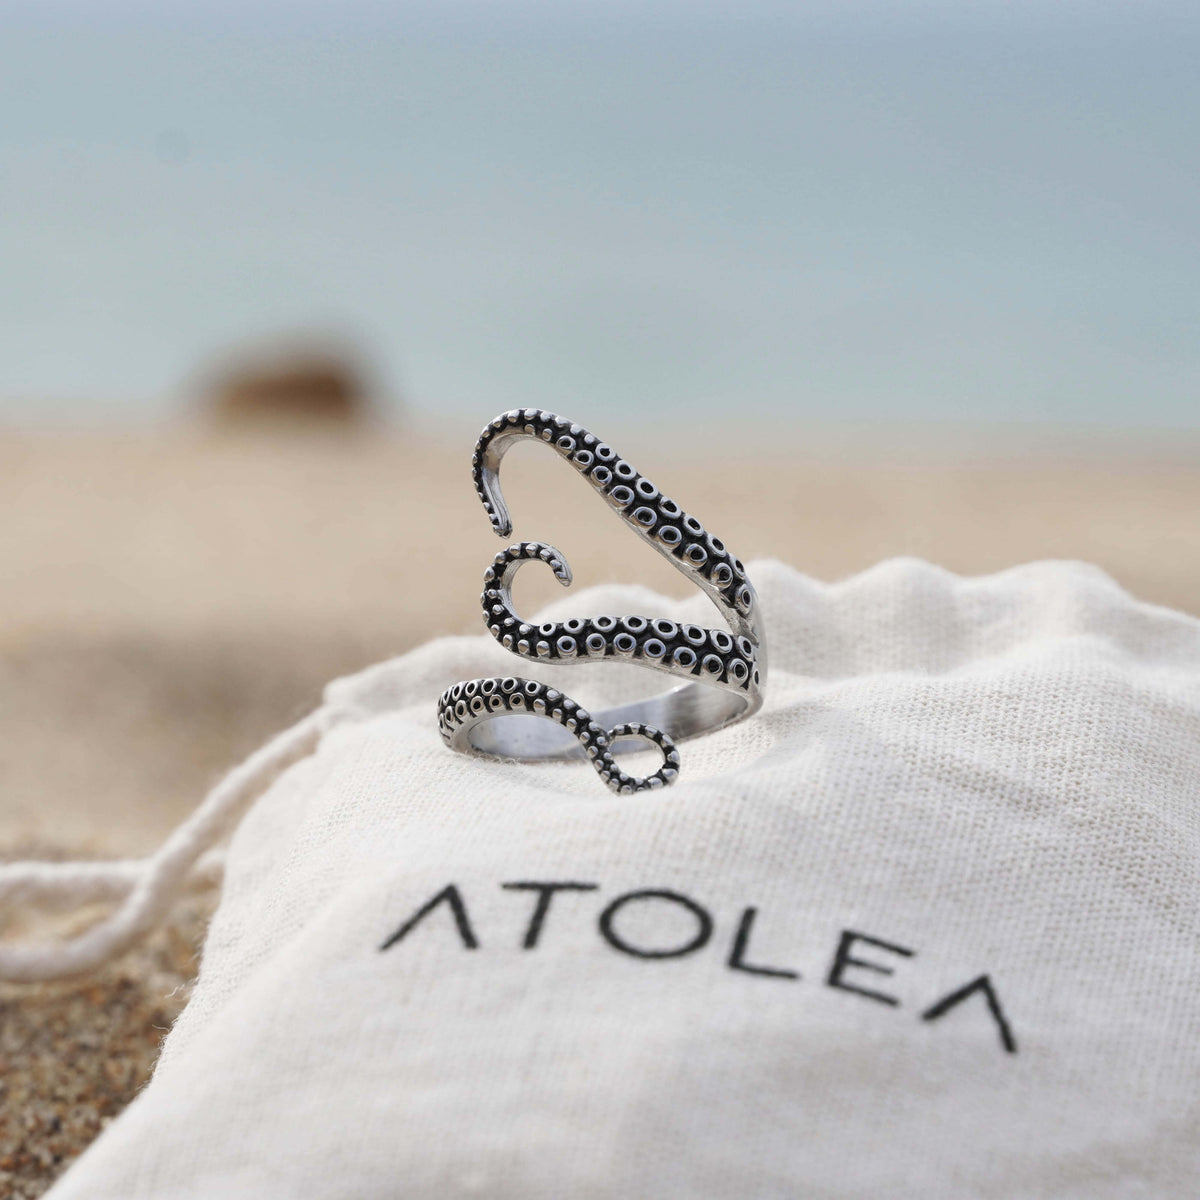 Our Octopus ring would make a perfect gift for an Scuba diving lover